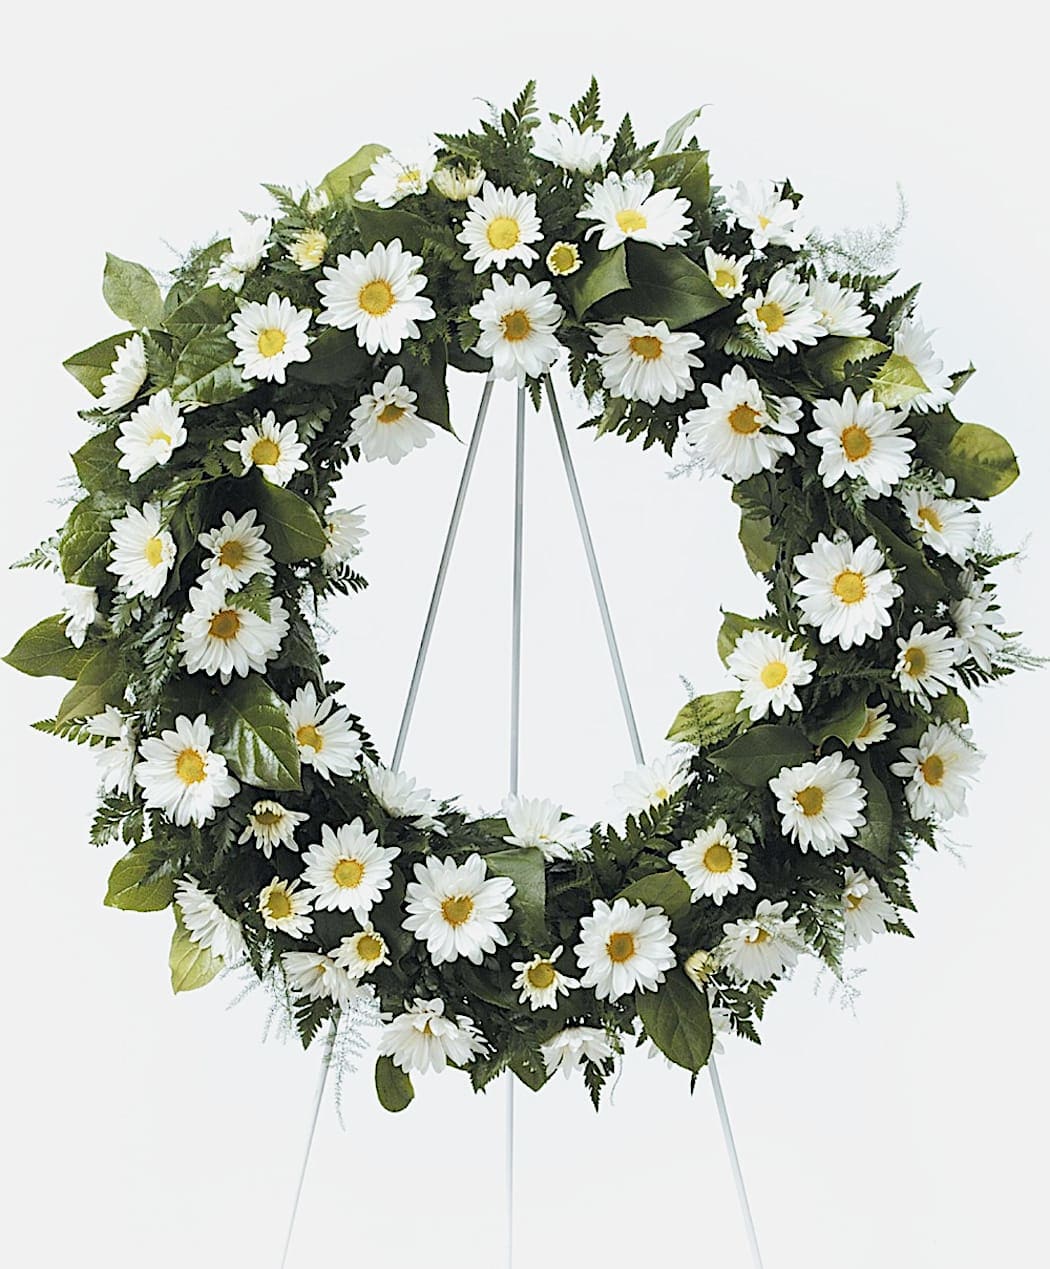 Field of Daisy Wreath - Large round wreath filled with white daisies. Other color options may be available. This wreath is approximately 16&quot; wide.